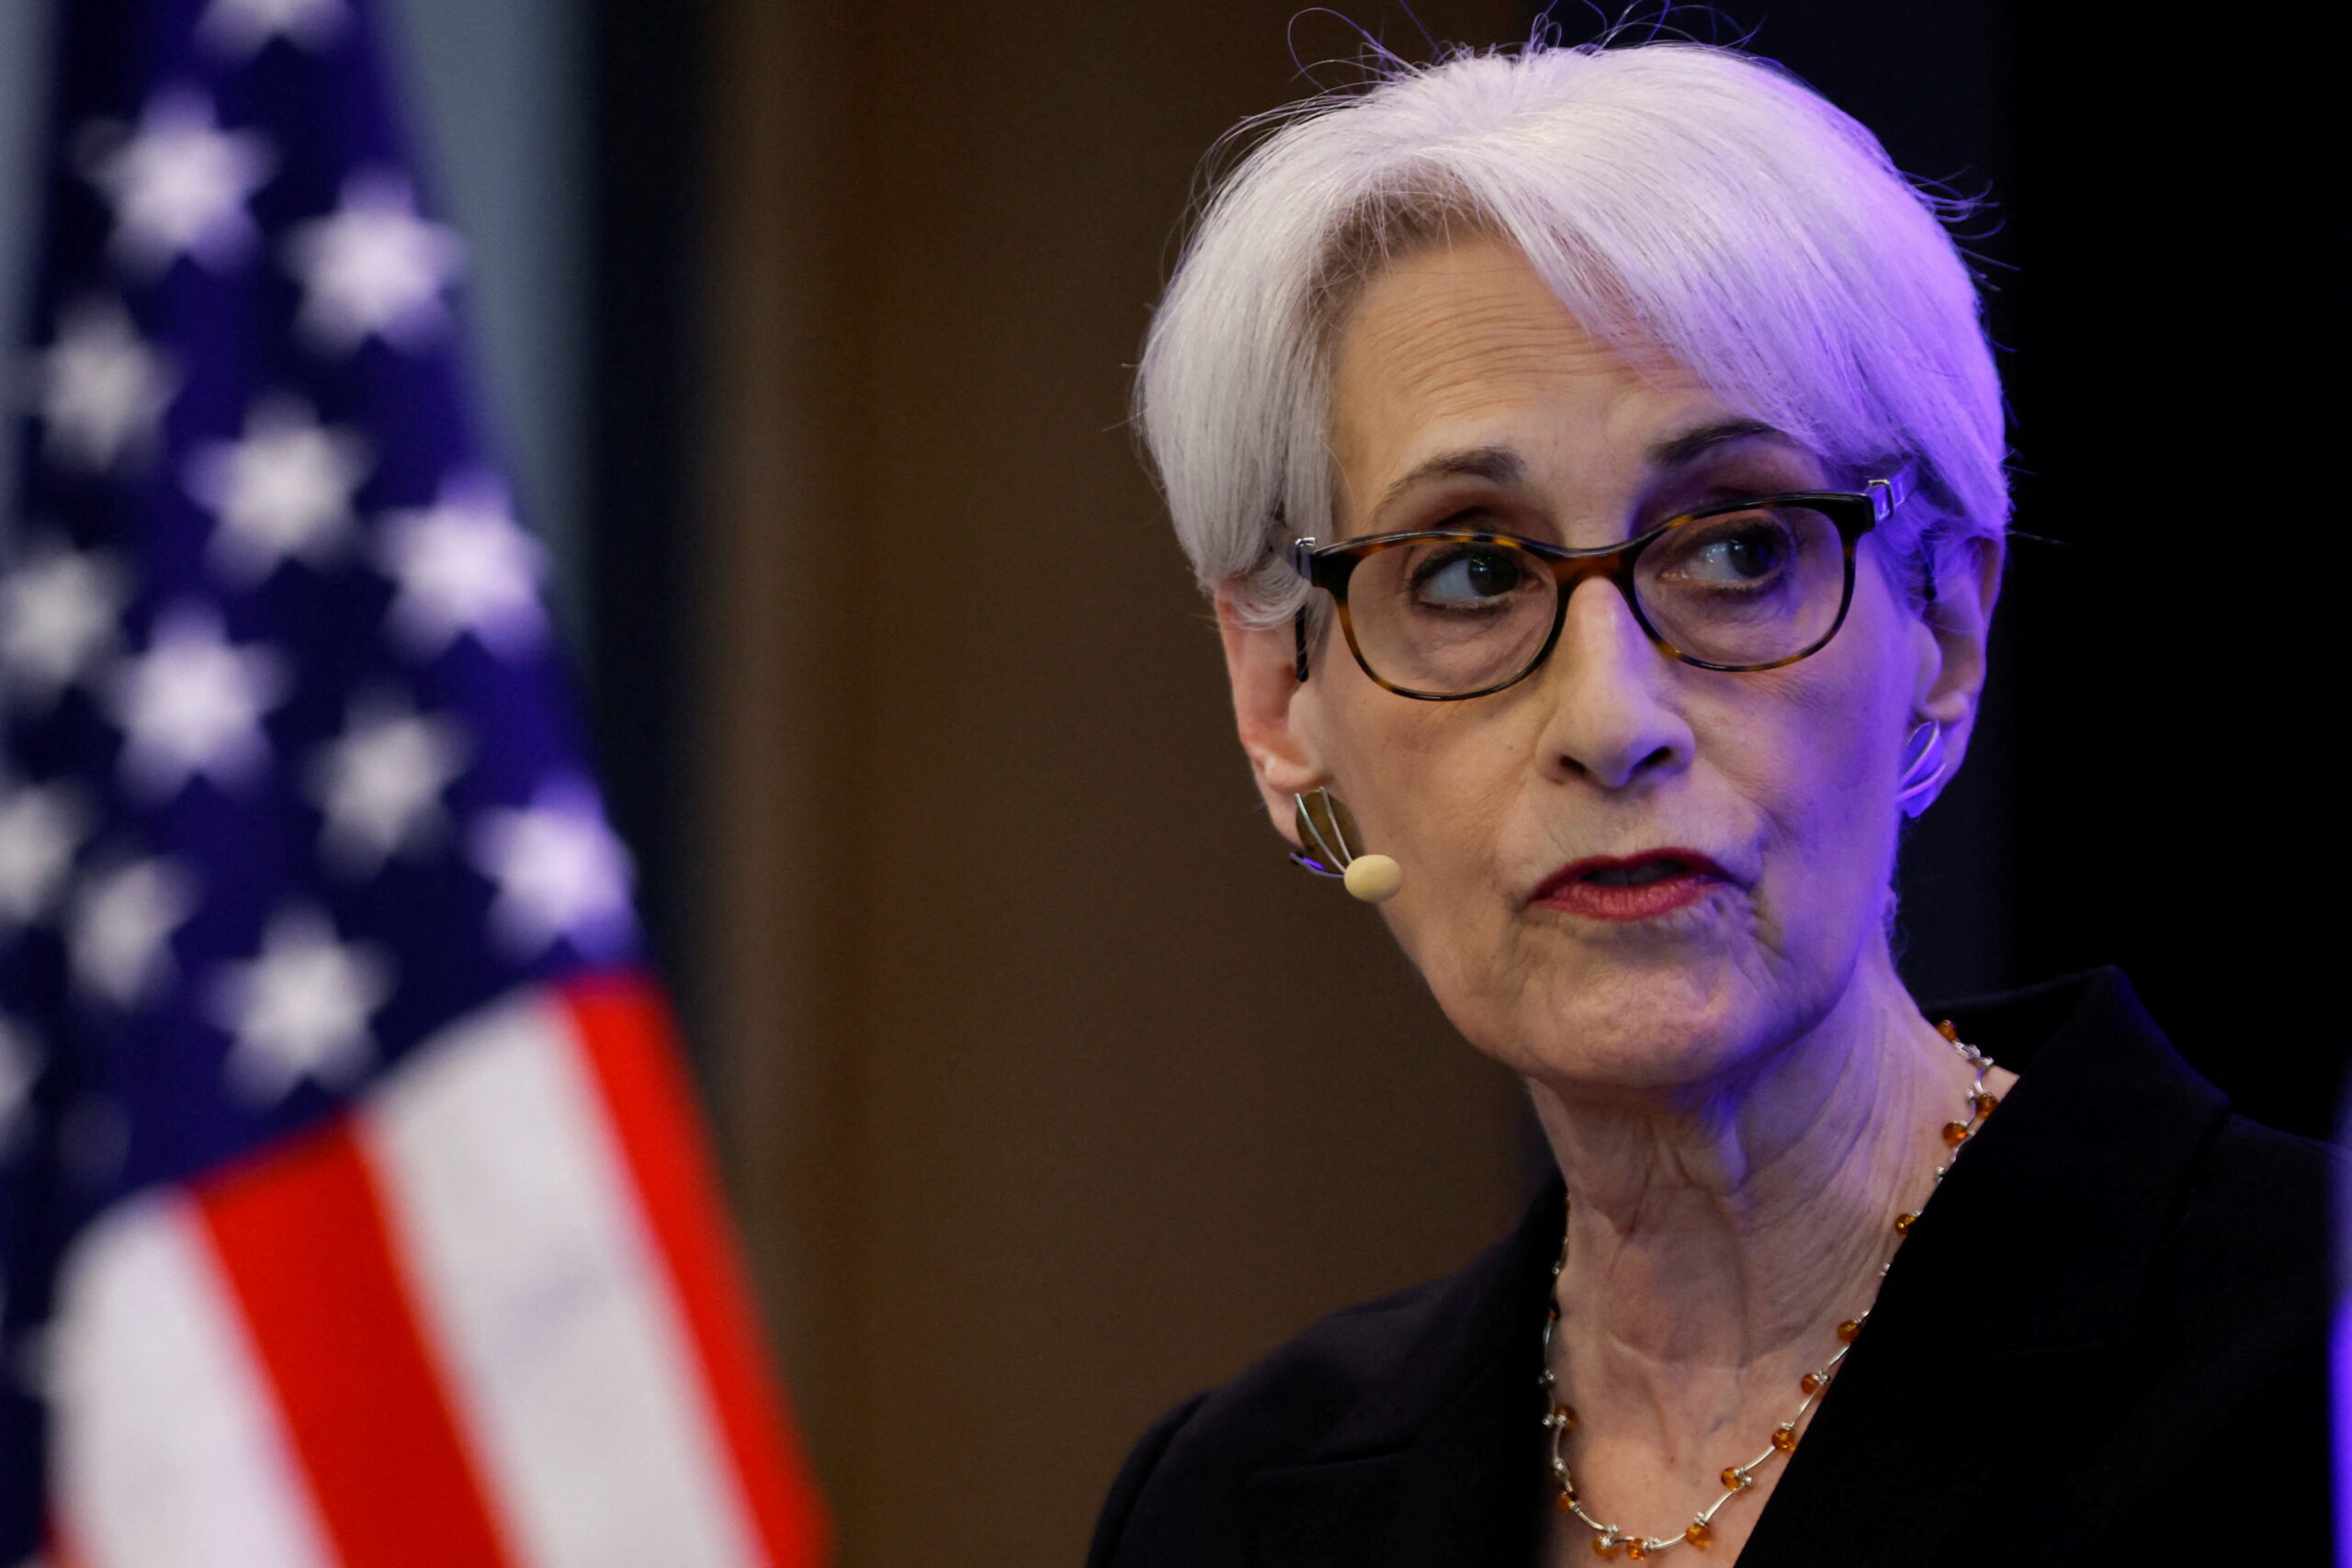 FILE PHOTO: U.S. Deputy Secretary of State Wendy Sherman speaks during a panel with the Friends of Europe in Brussels, Belgium, April 21, 2022. REUTERS/Johanna Geron/File Photo